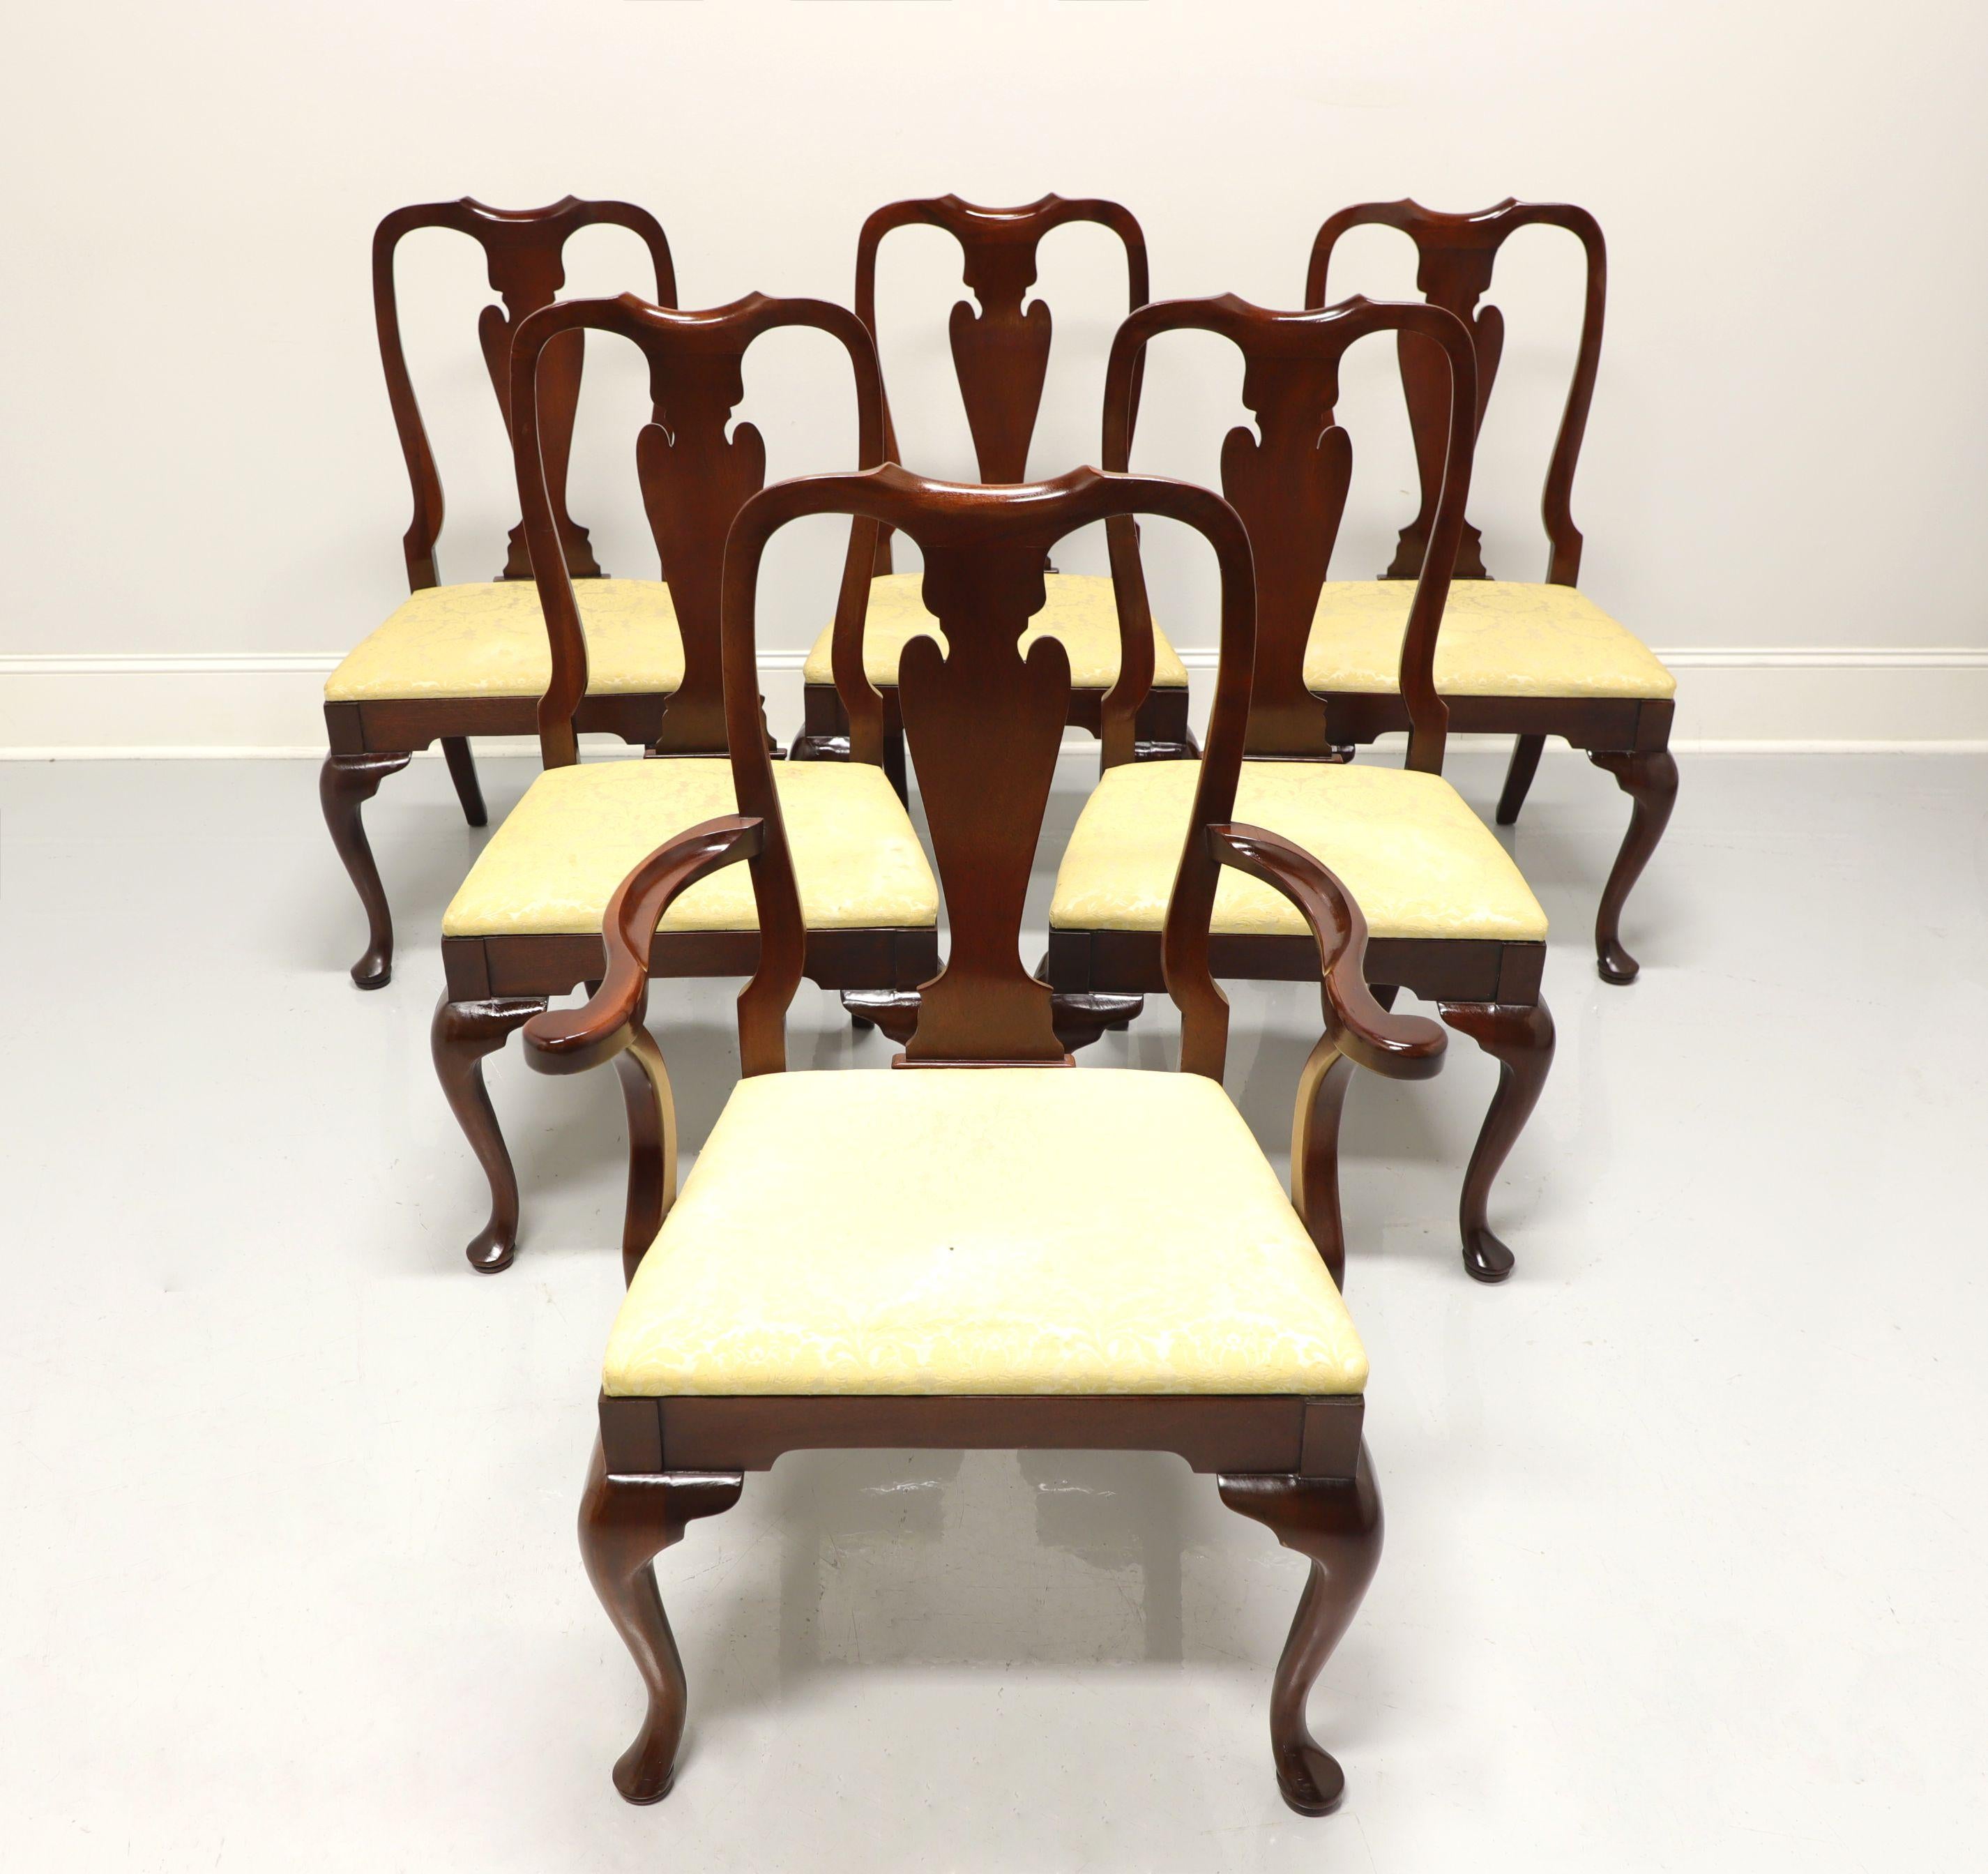 A set of six Queen Anne style dining chairs by Hickory Chair. Mahogany with solid carved backs, cabriole legs, pad feet and creamy yellow fabric upholstered seats. Five side chairs and one armchair. Made in the USA, in the late 20th